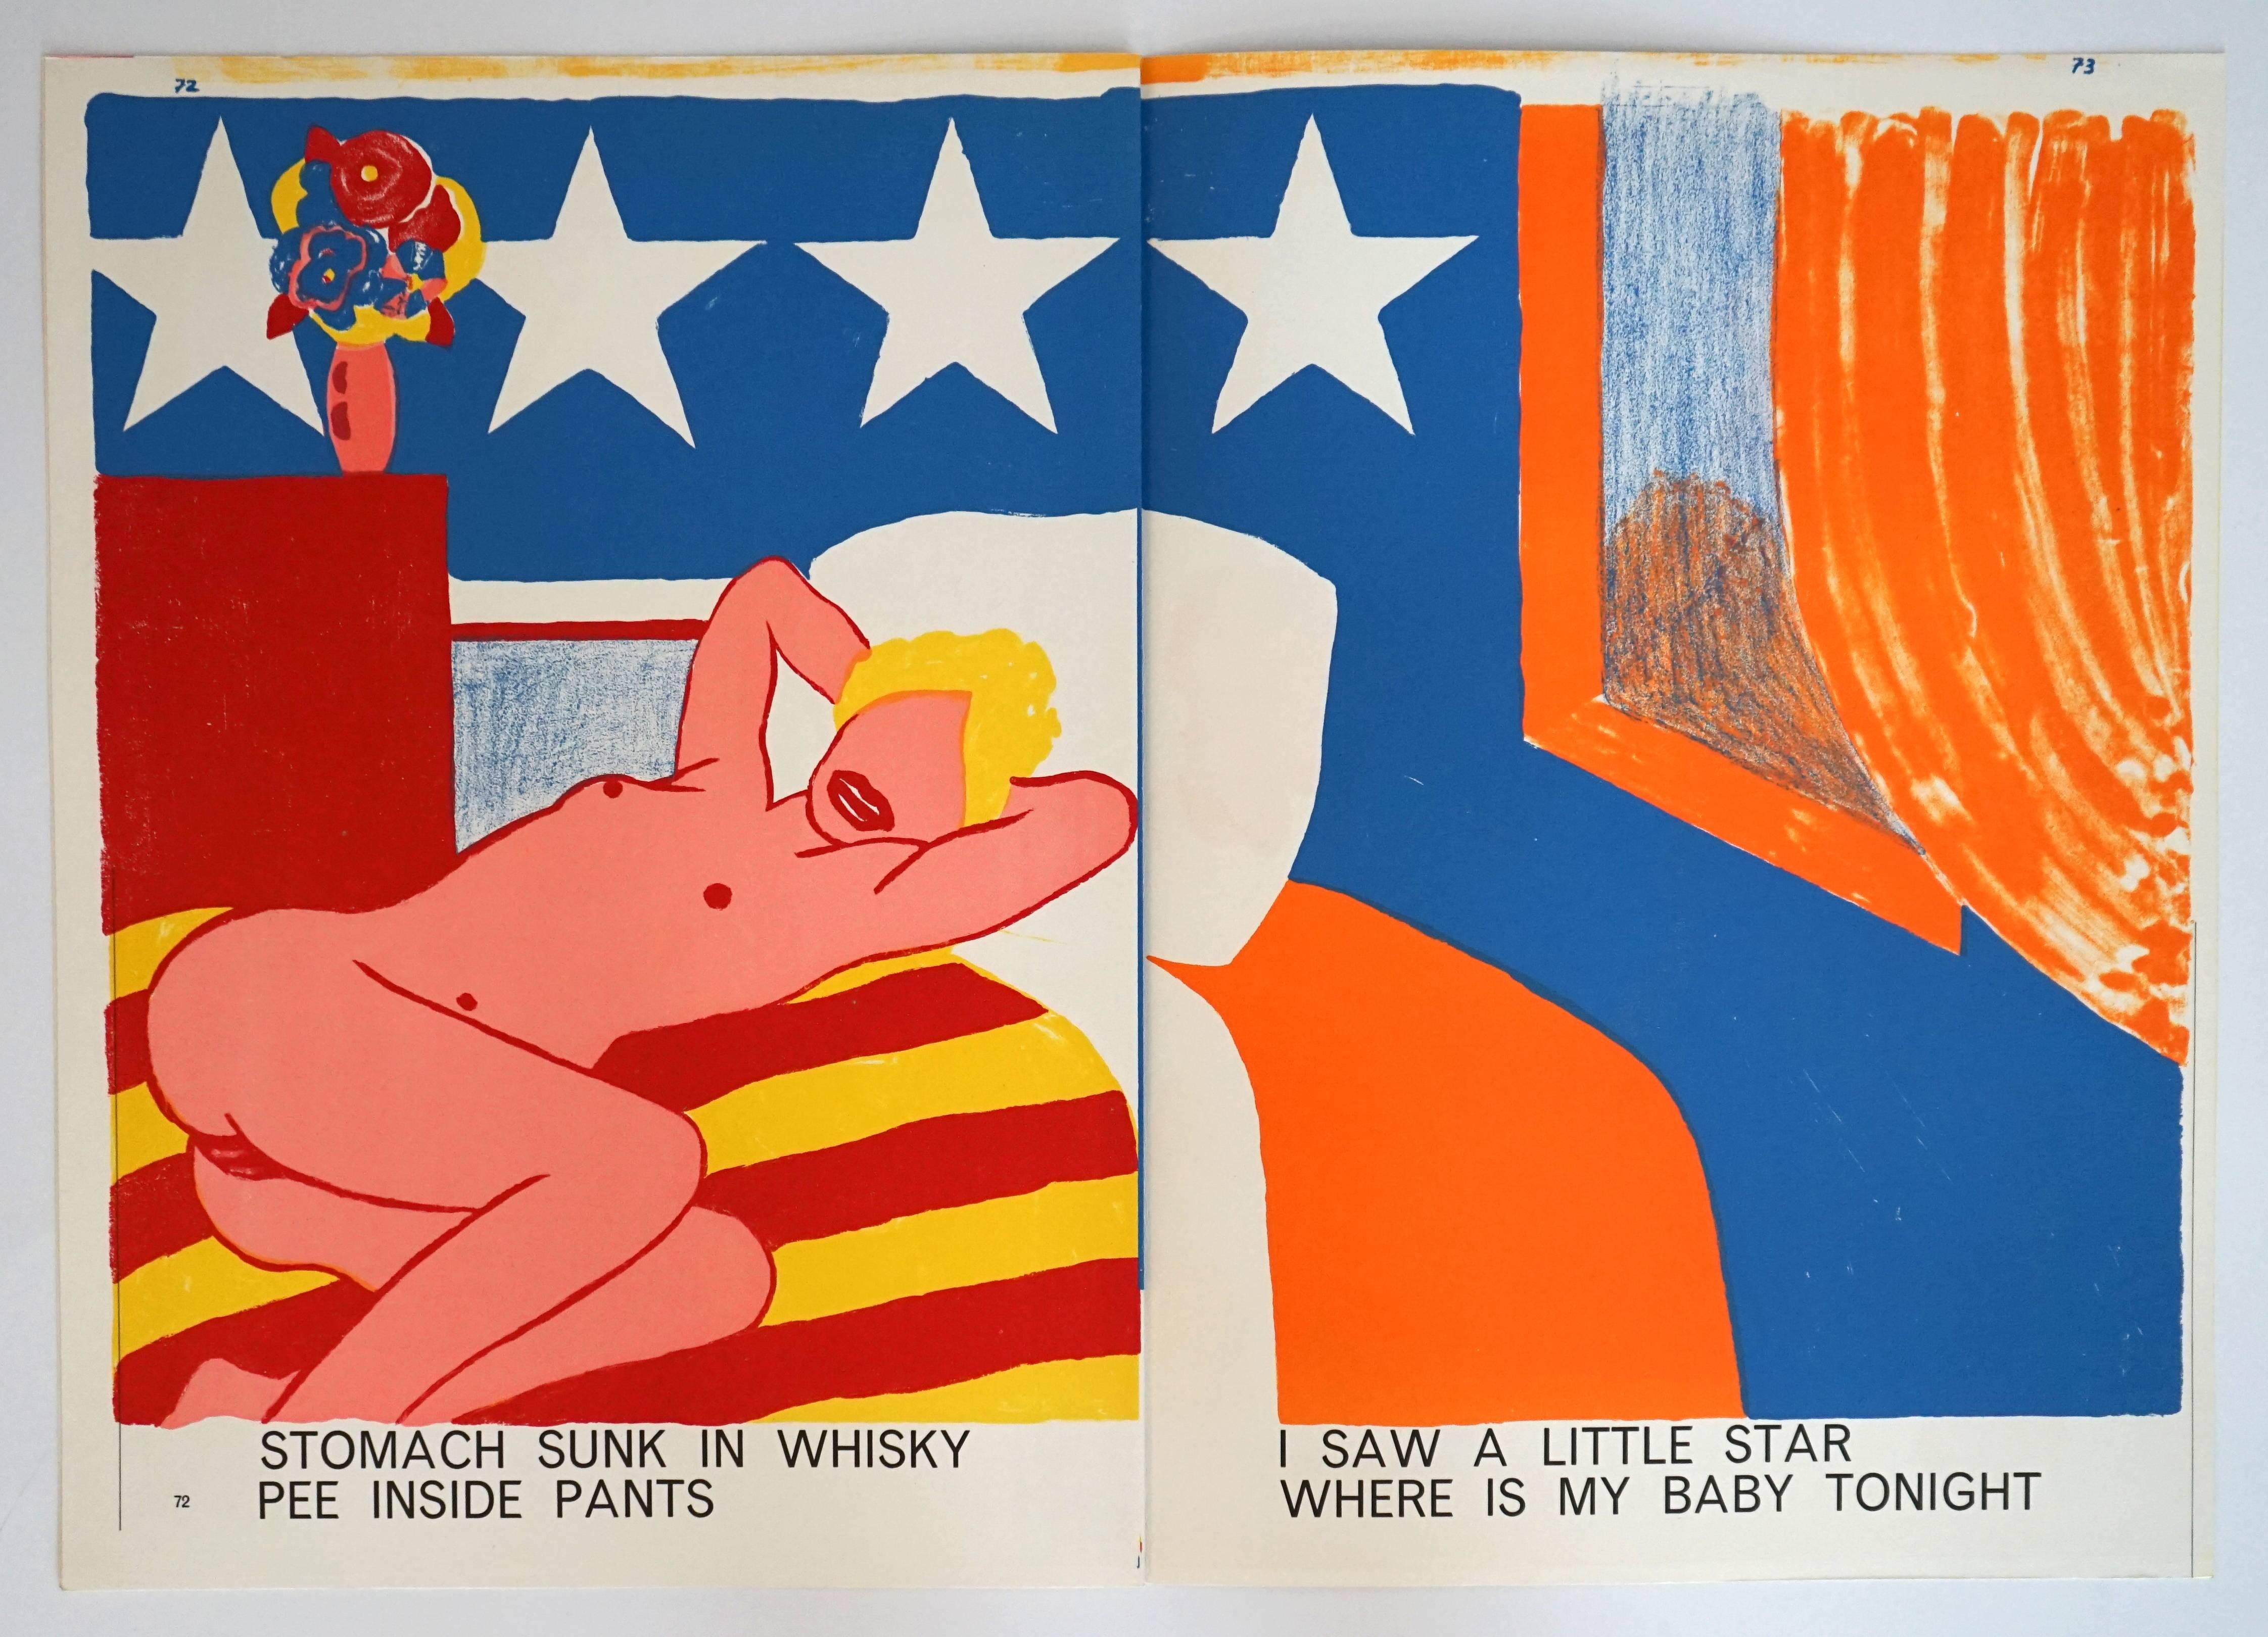 Tom Wesselmann Nude Print - UNTITLED (from One Cent Life Portfolio)